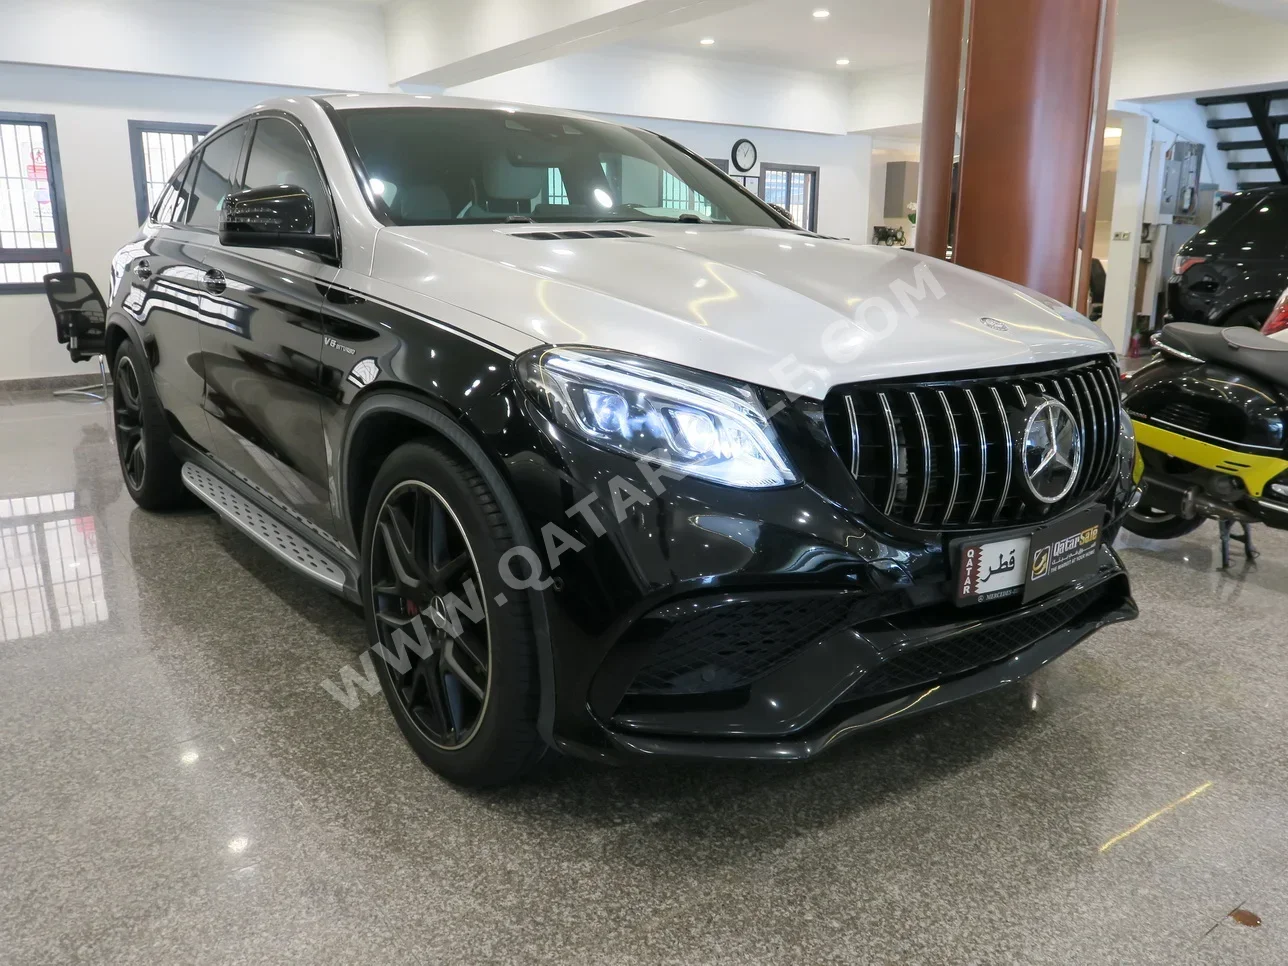 Mercedes-Benz  GLE  63S AMG  2017  Automatic  125,000 Km  8 Cylinder  Four Wheel Drive (4WD)  SUV  Black